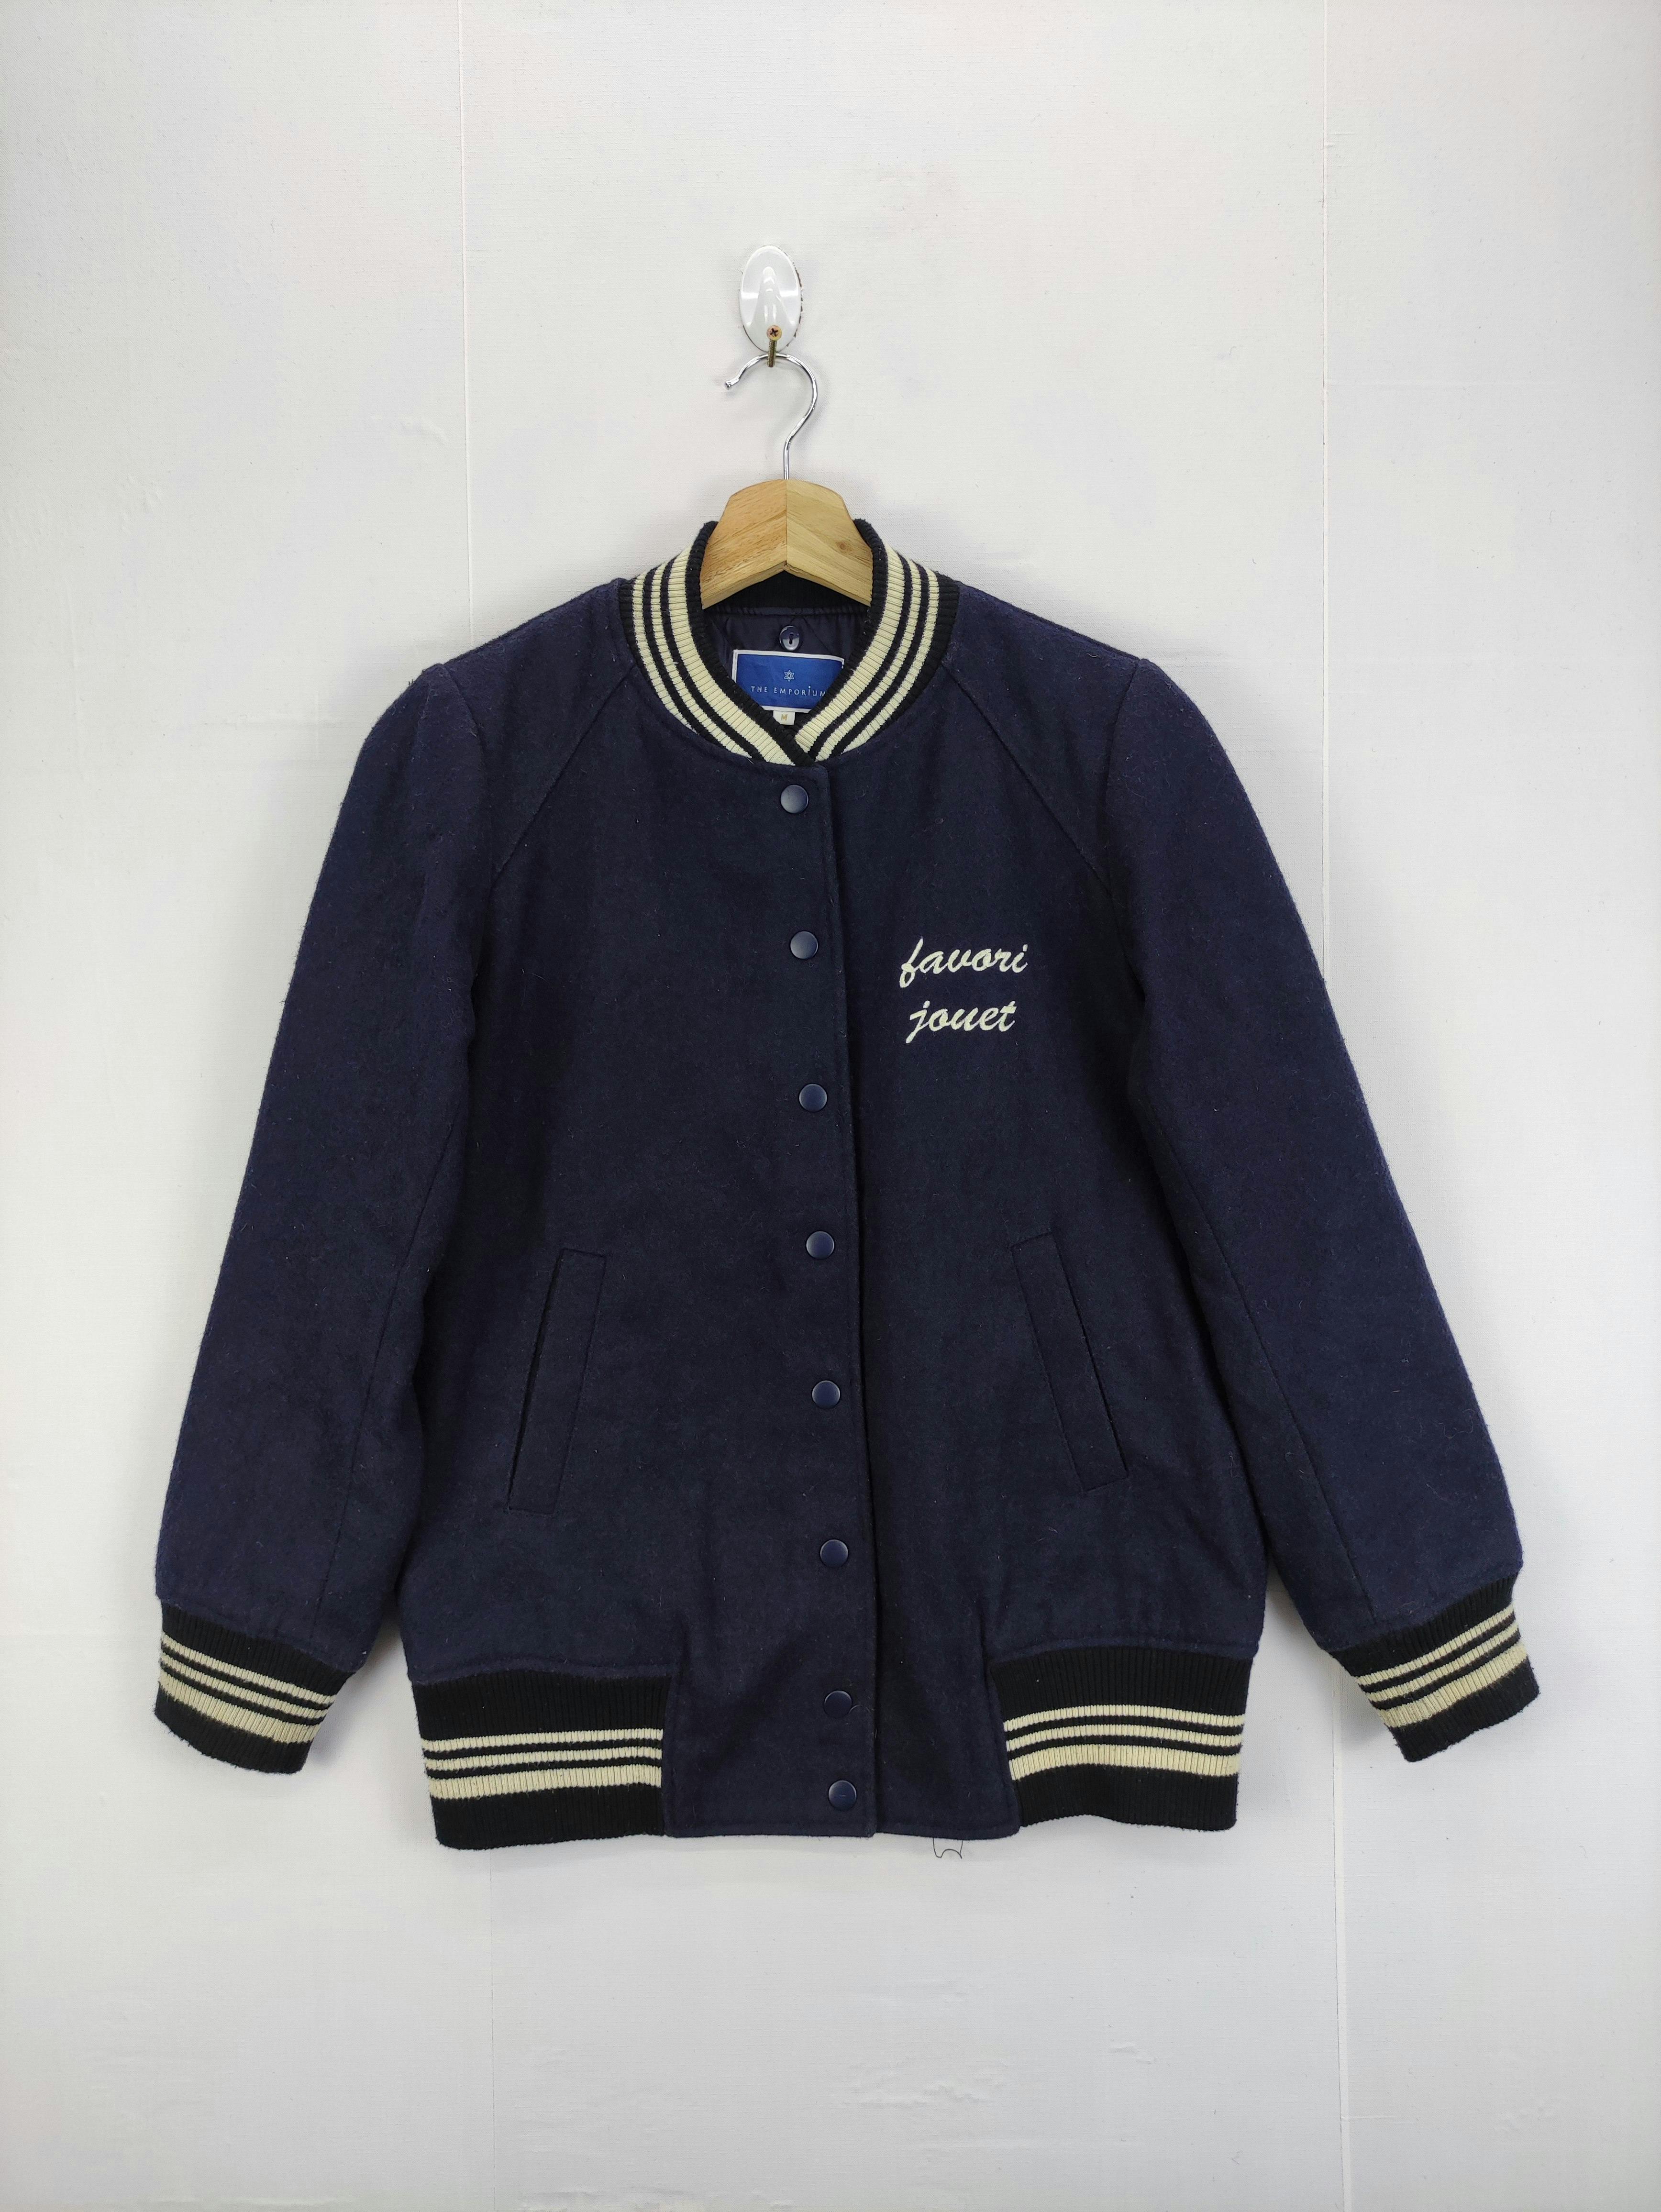 Vintage Varsity Wool Jacket Snap Button By The Emporium - 1